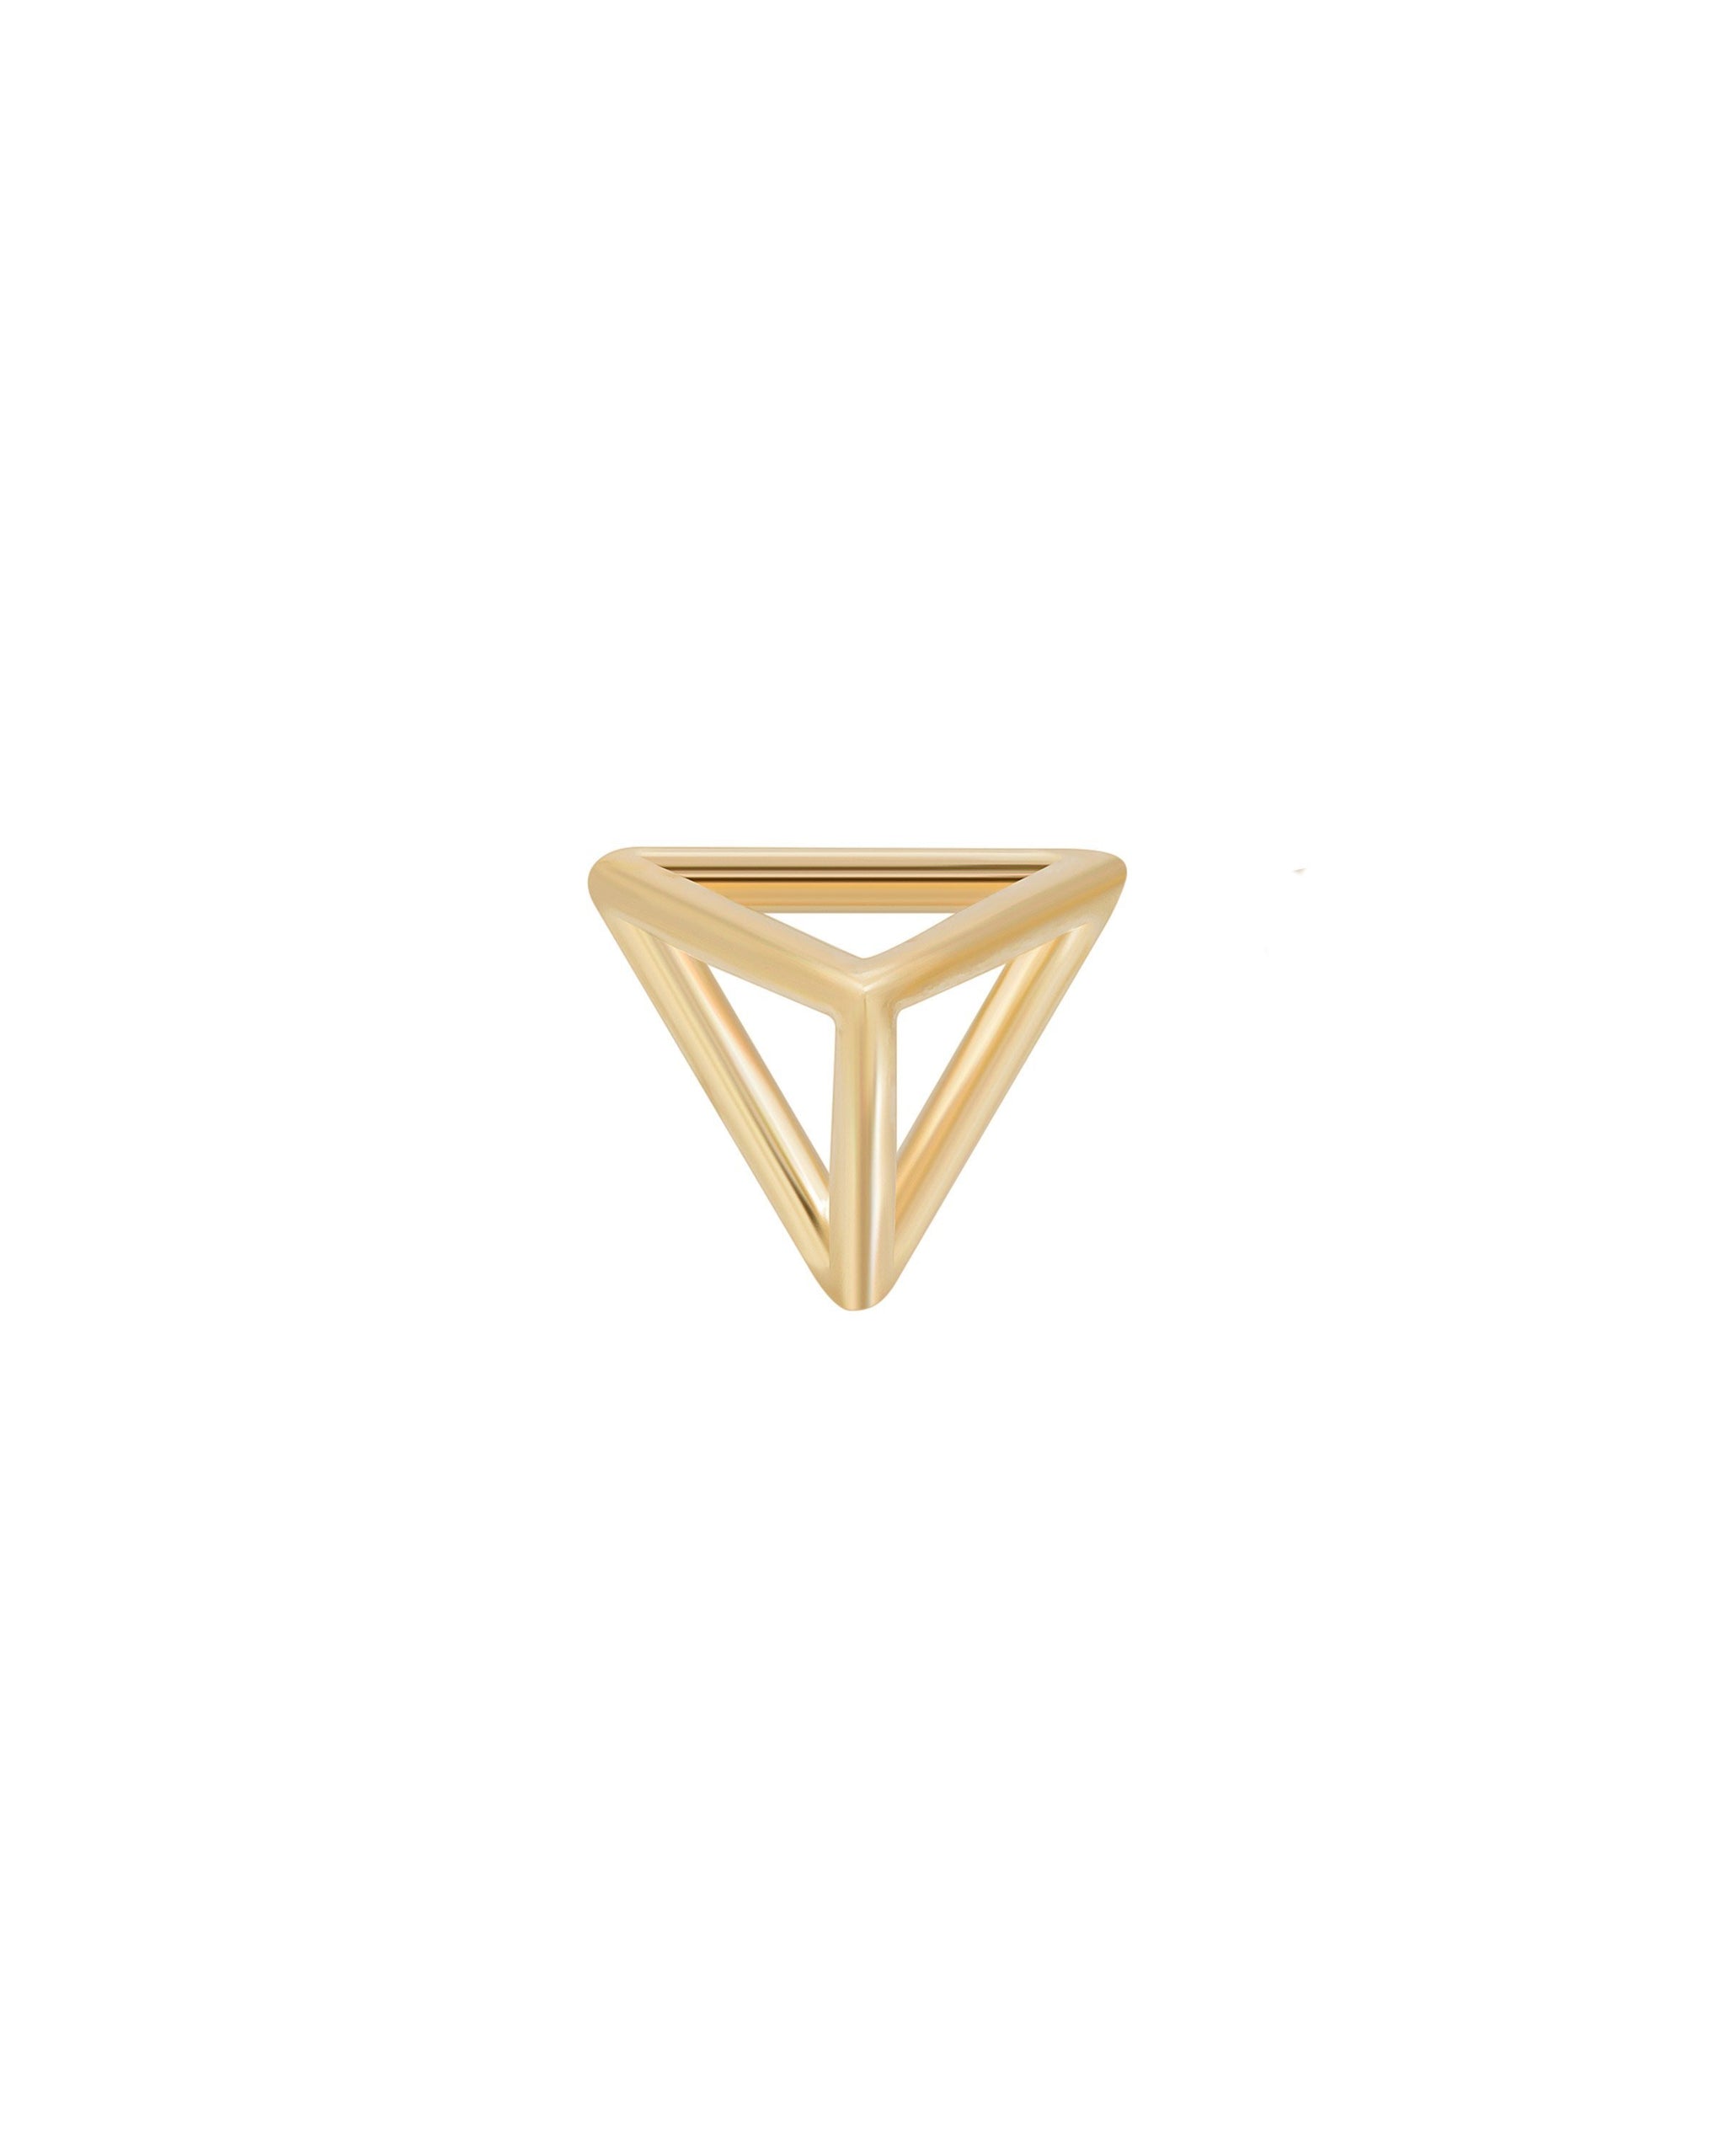 Prism Studs, Three dimensional 14k gold pyramid stud earrings, handmade by Turquoise and Tobacco